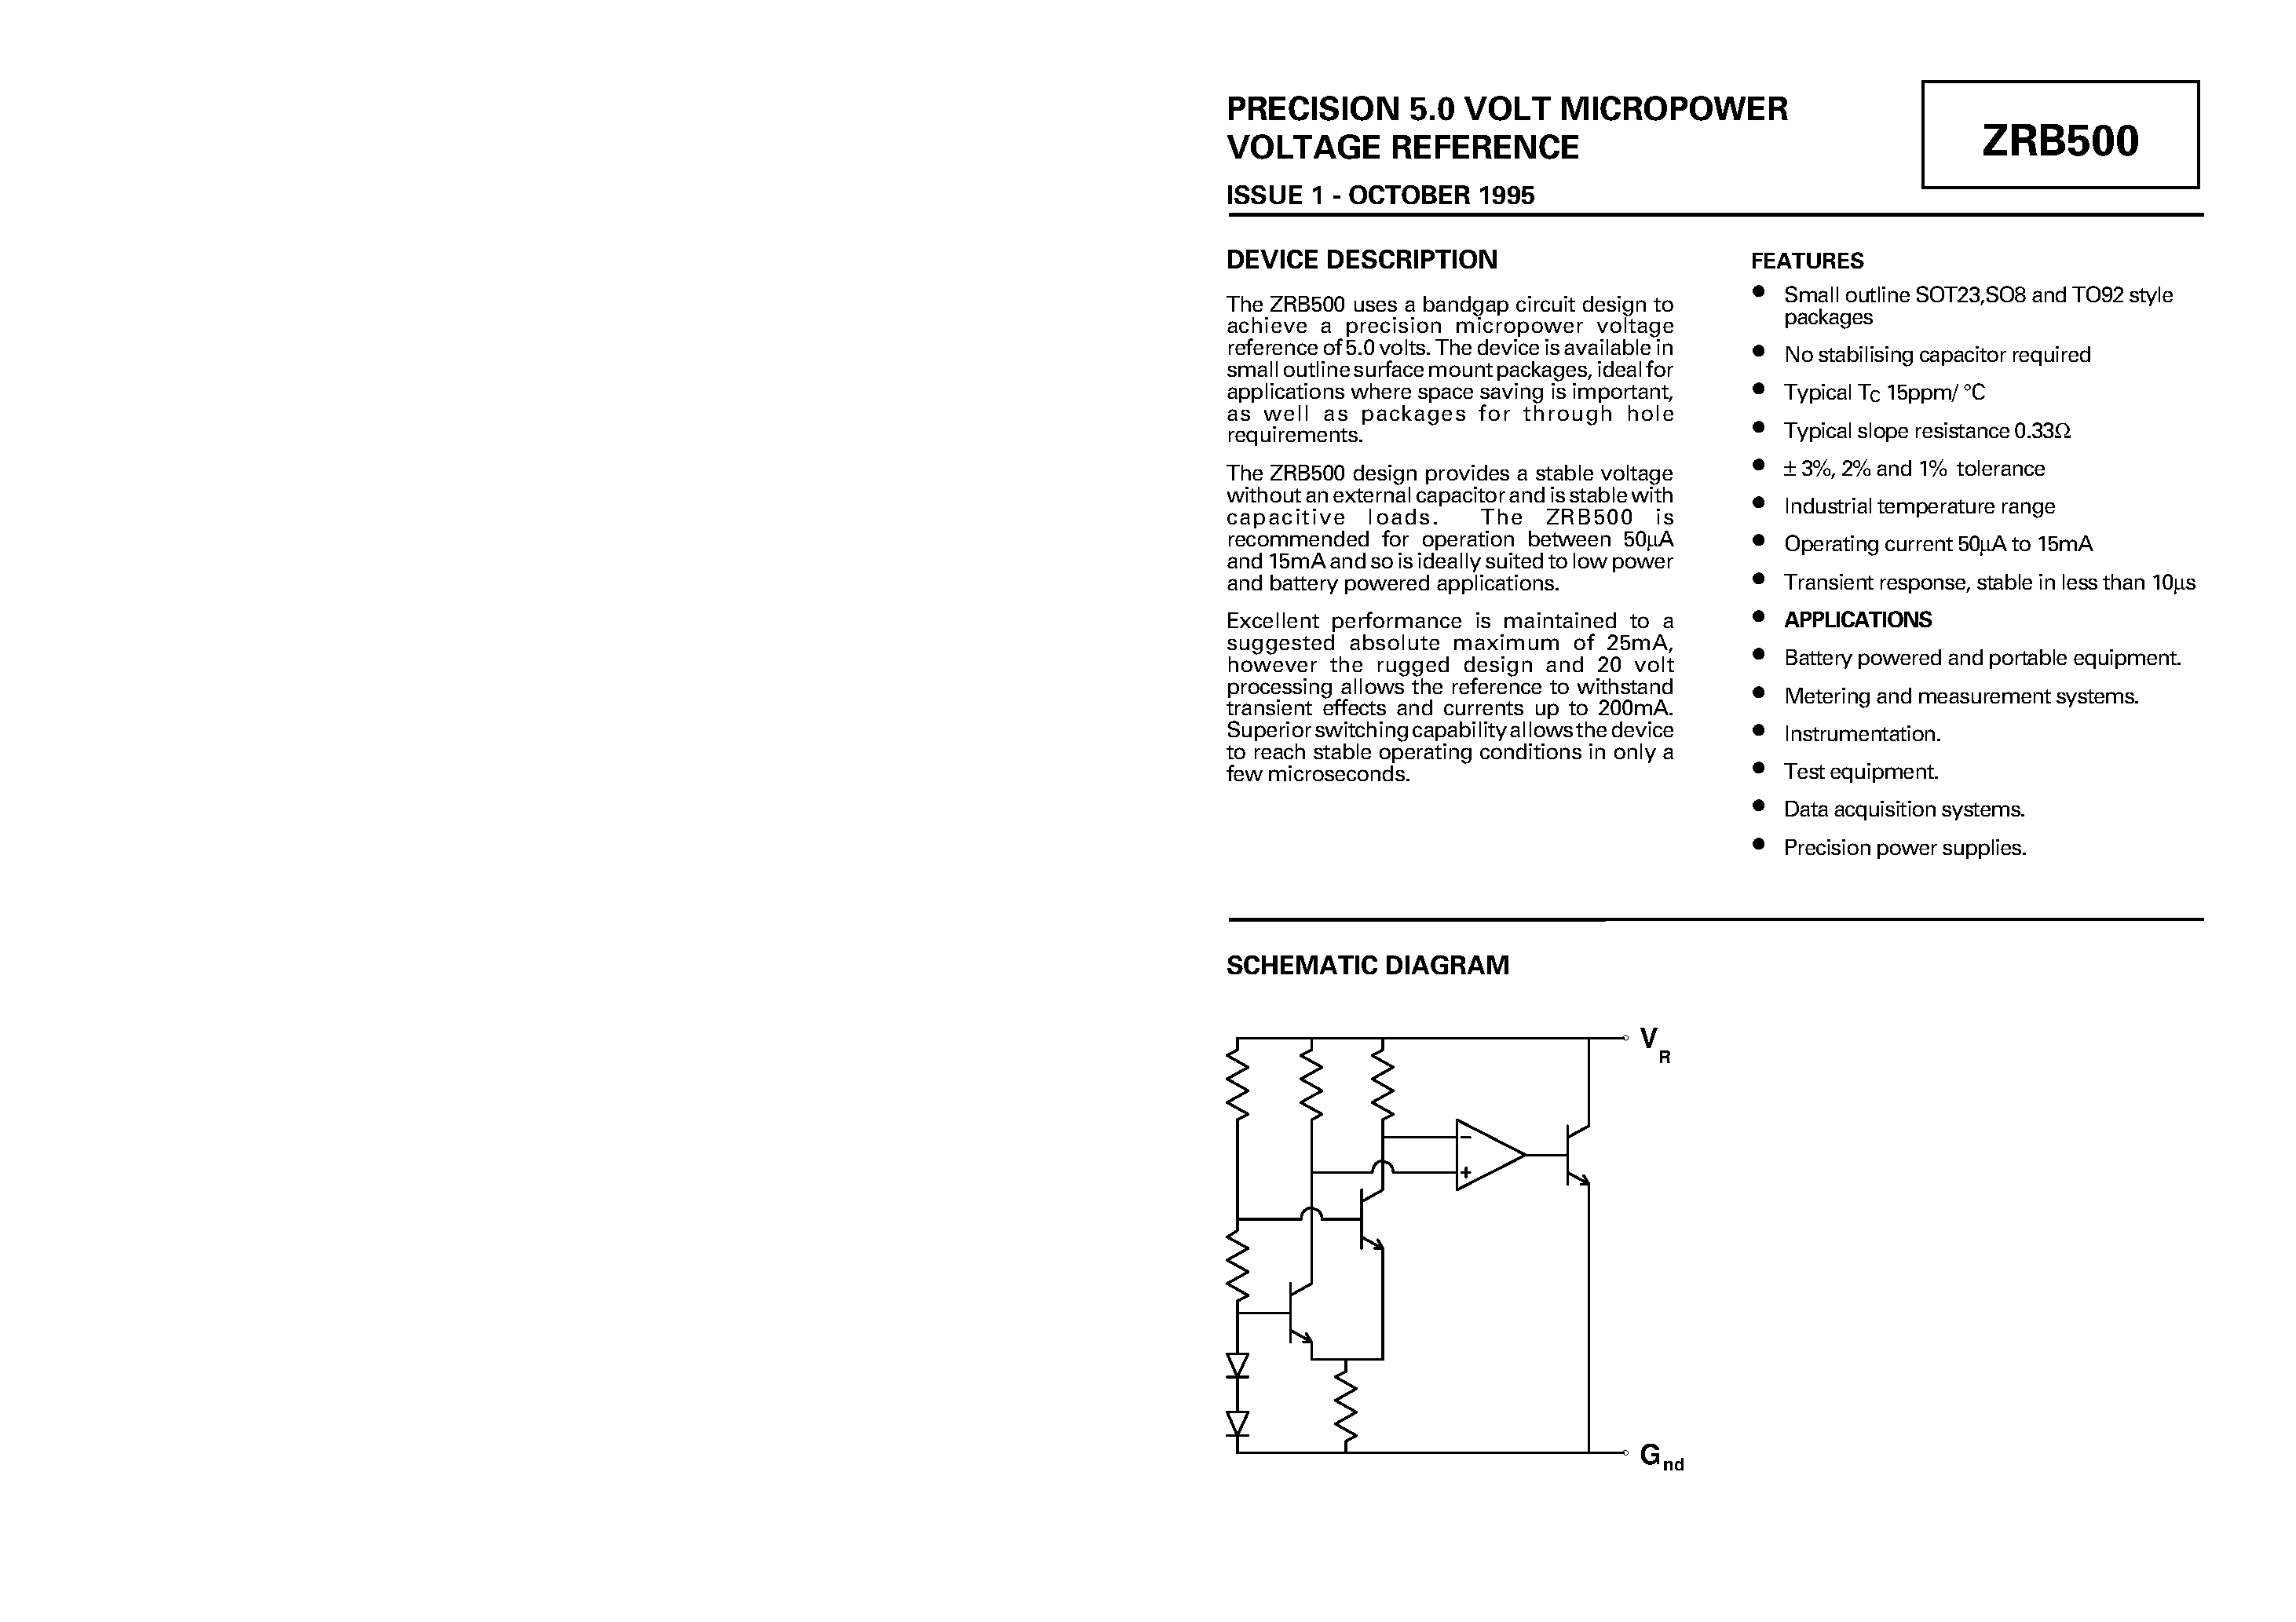 Datasheet ZRB500F03 - PRECISION 5.0 VOLT MICROPOWER VOLTAGE REFERENCE page 1